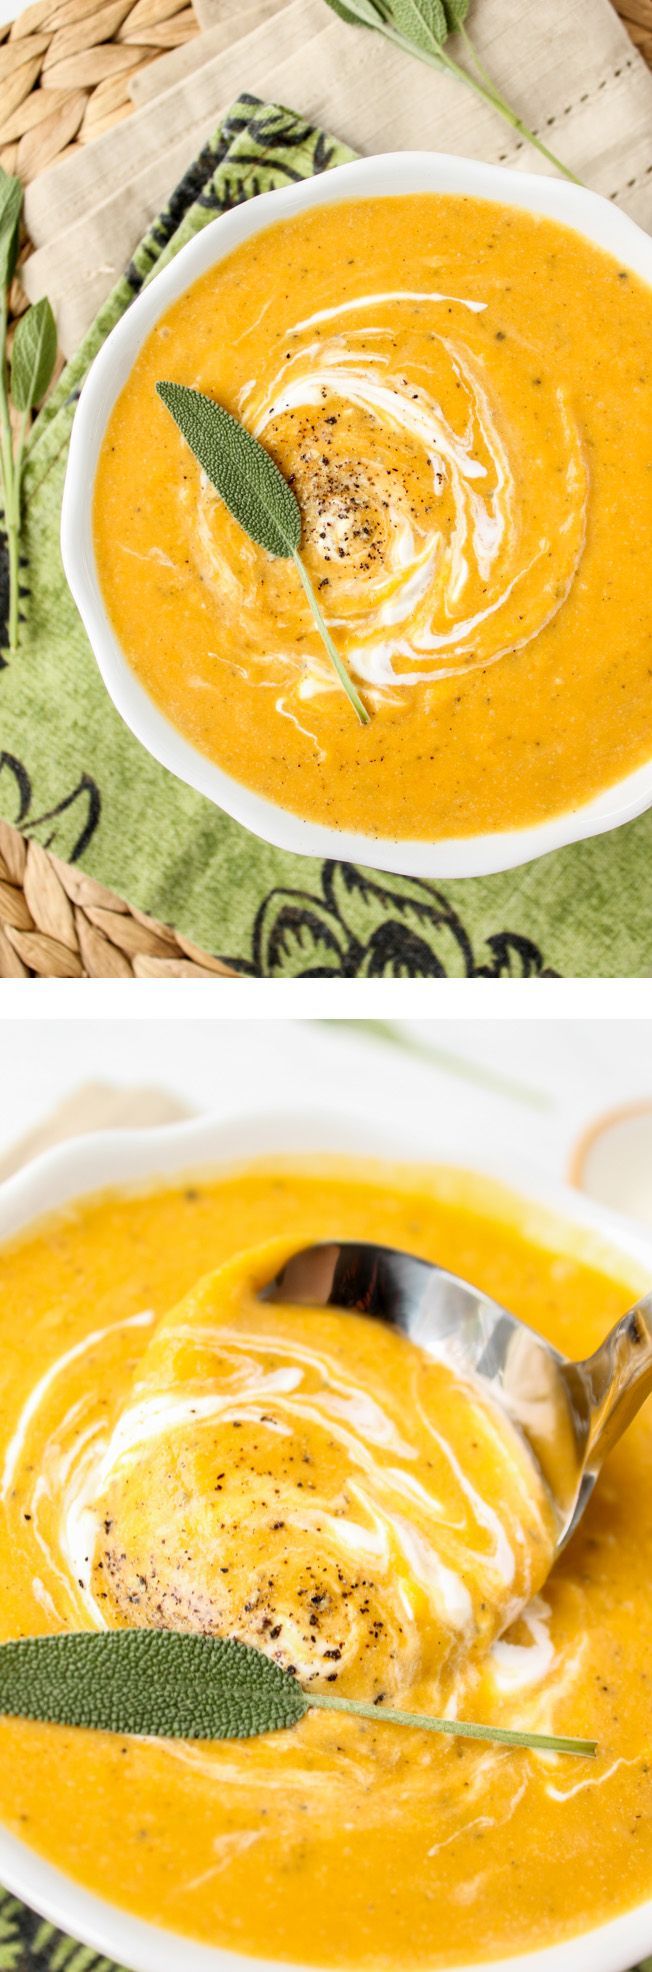 Roasted Butternut Squash Soup from The Food Charlatan // This soup is full of flavor but not calories! Comfort food for a cold